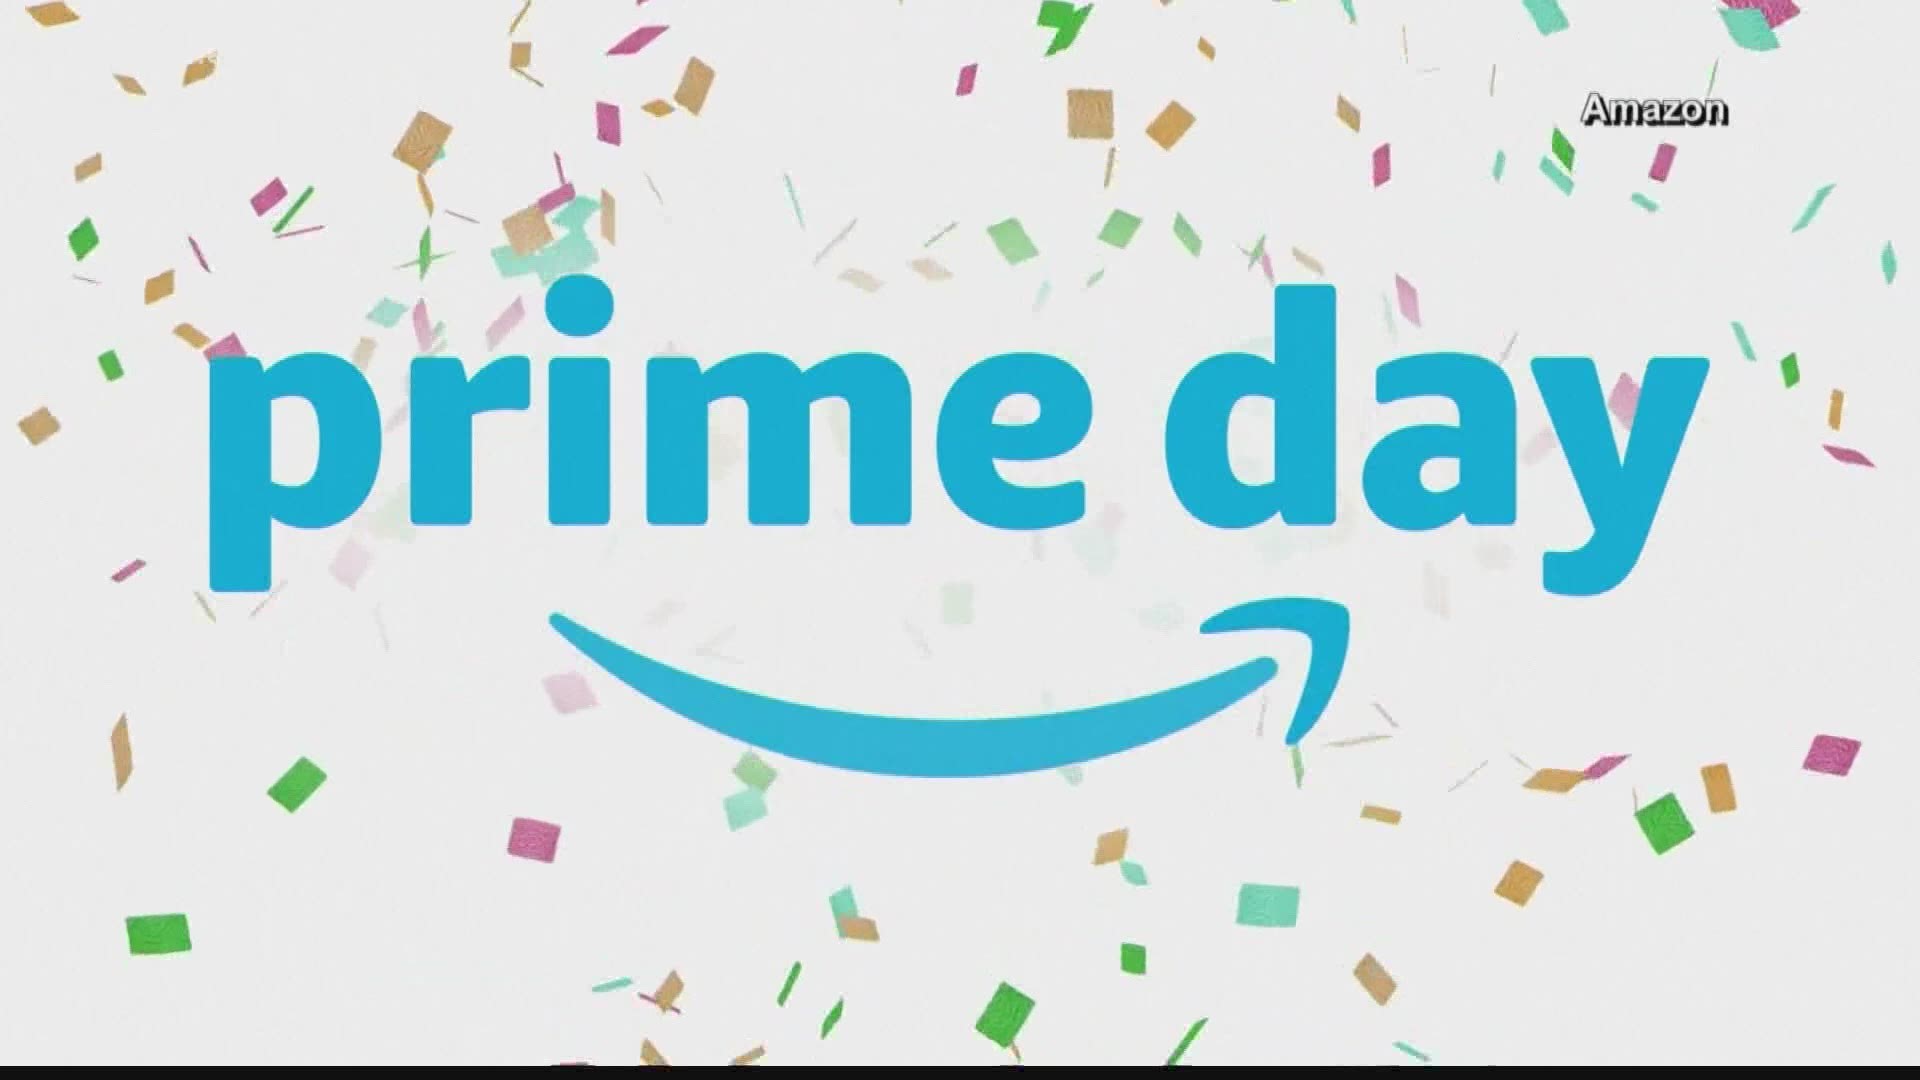 The company says Prime Day is still happening but will be pushed back to later on this year.